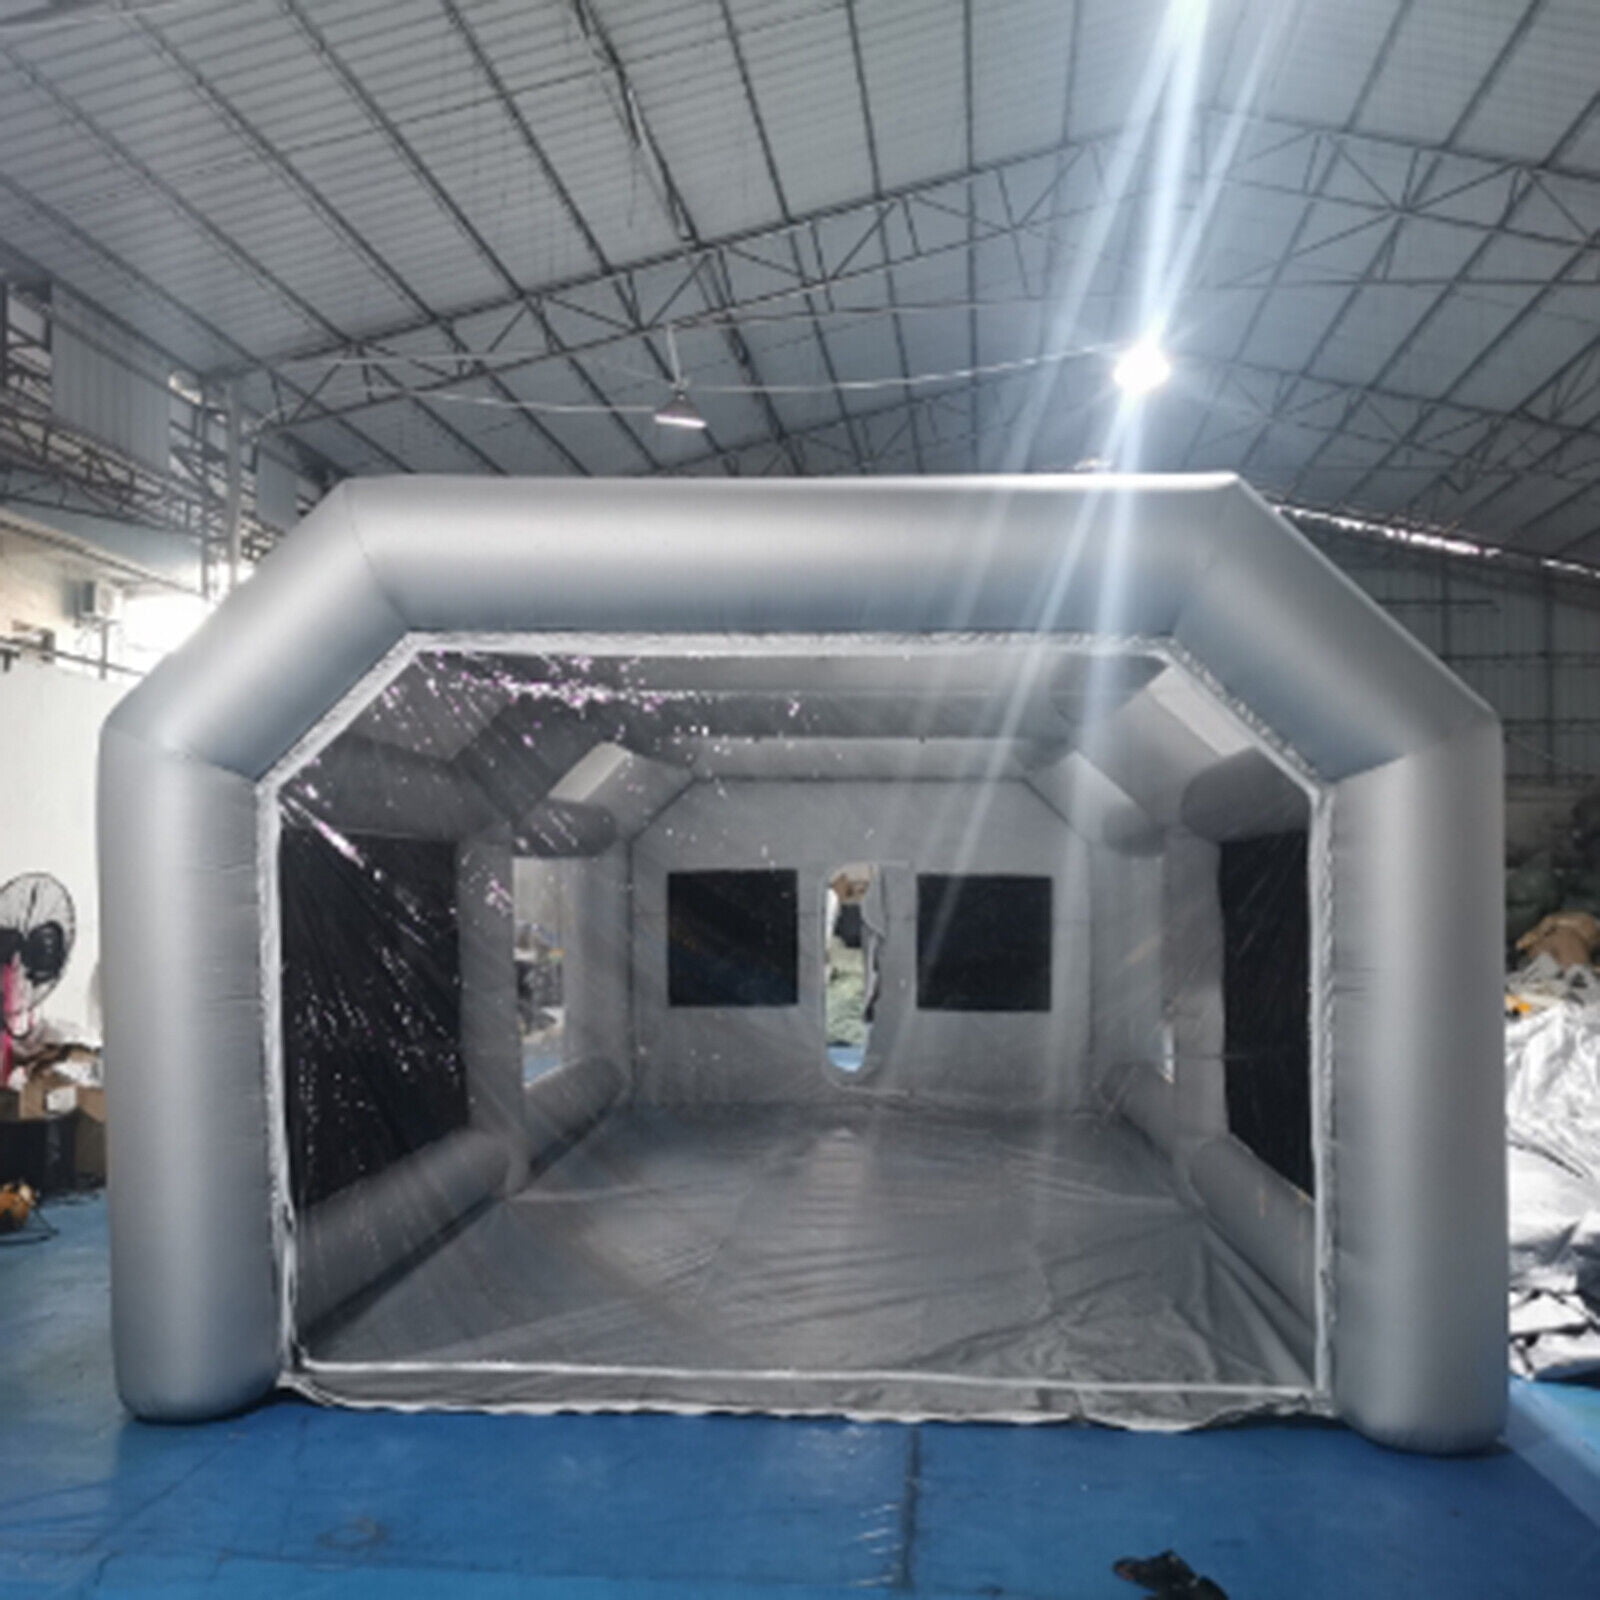 Inflatable Spray Booth Mobile Portable Paint Tent Car Paint 2 Filter System